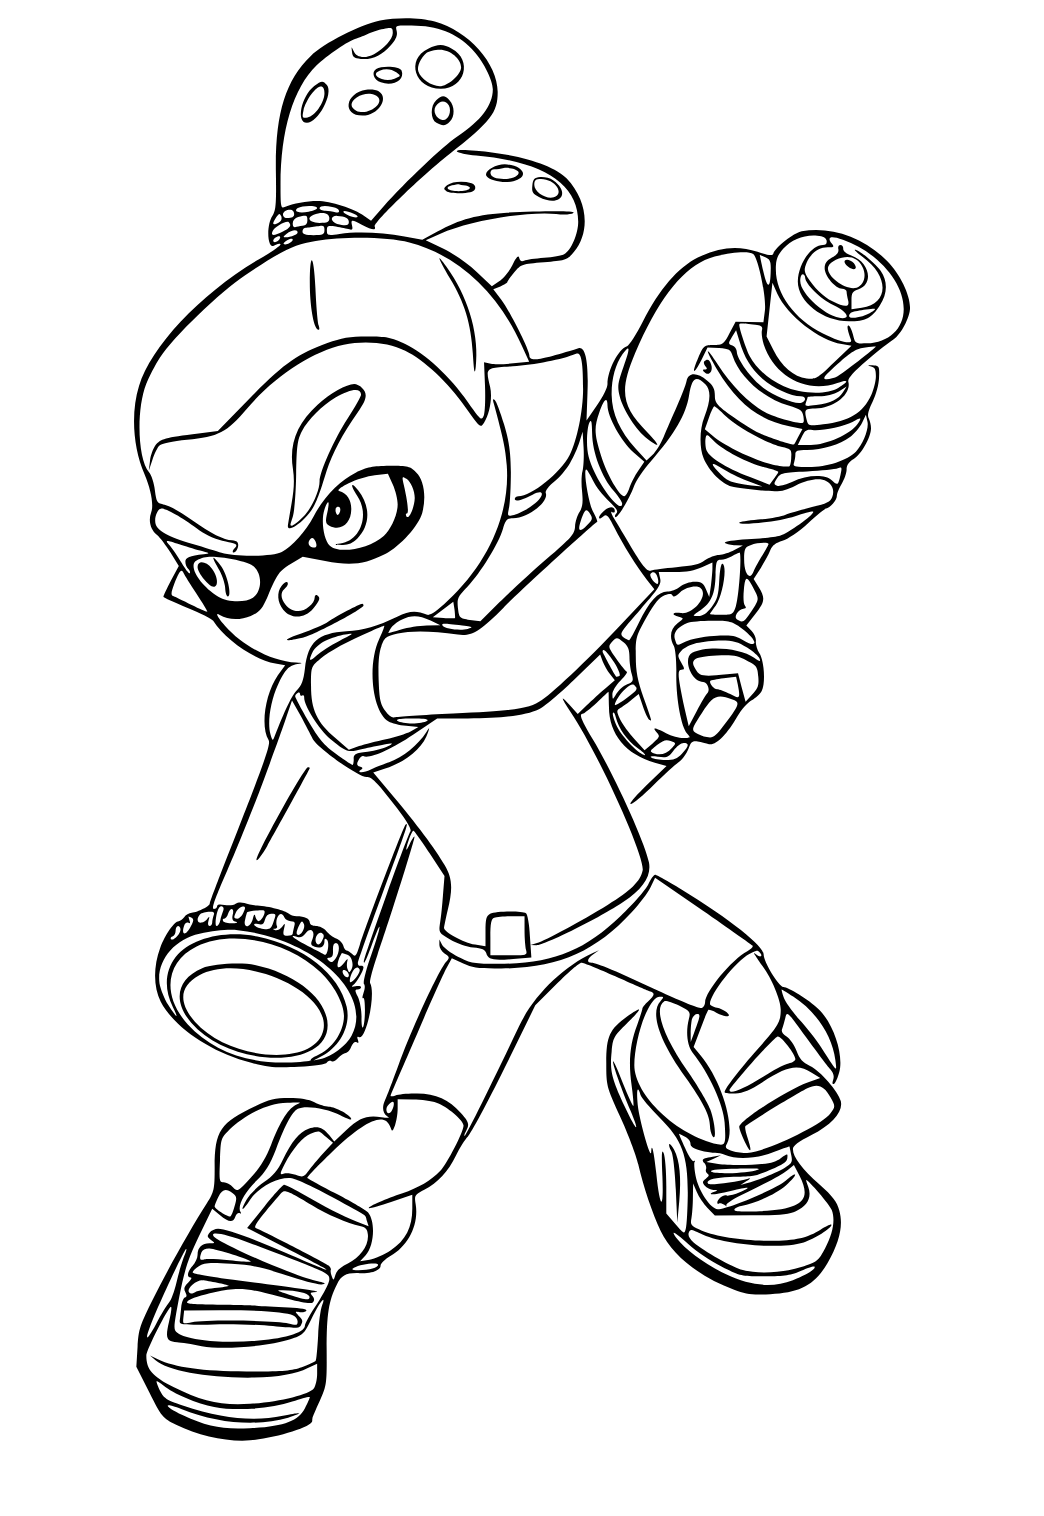 Free Printable Splatoon Warrior Coloring Page for Adults and Kids ...